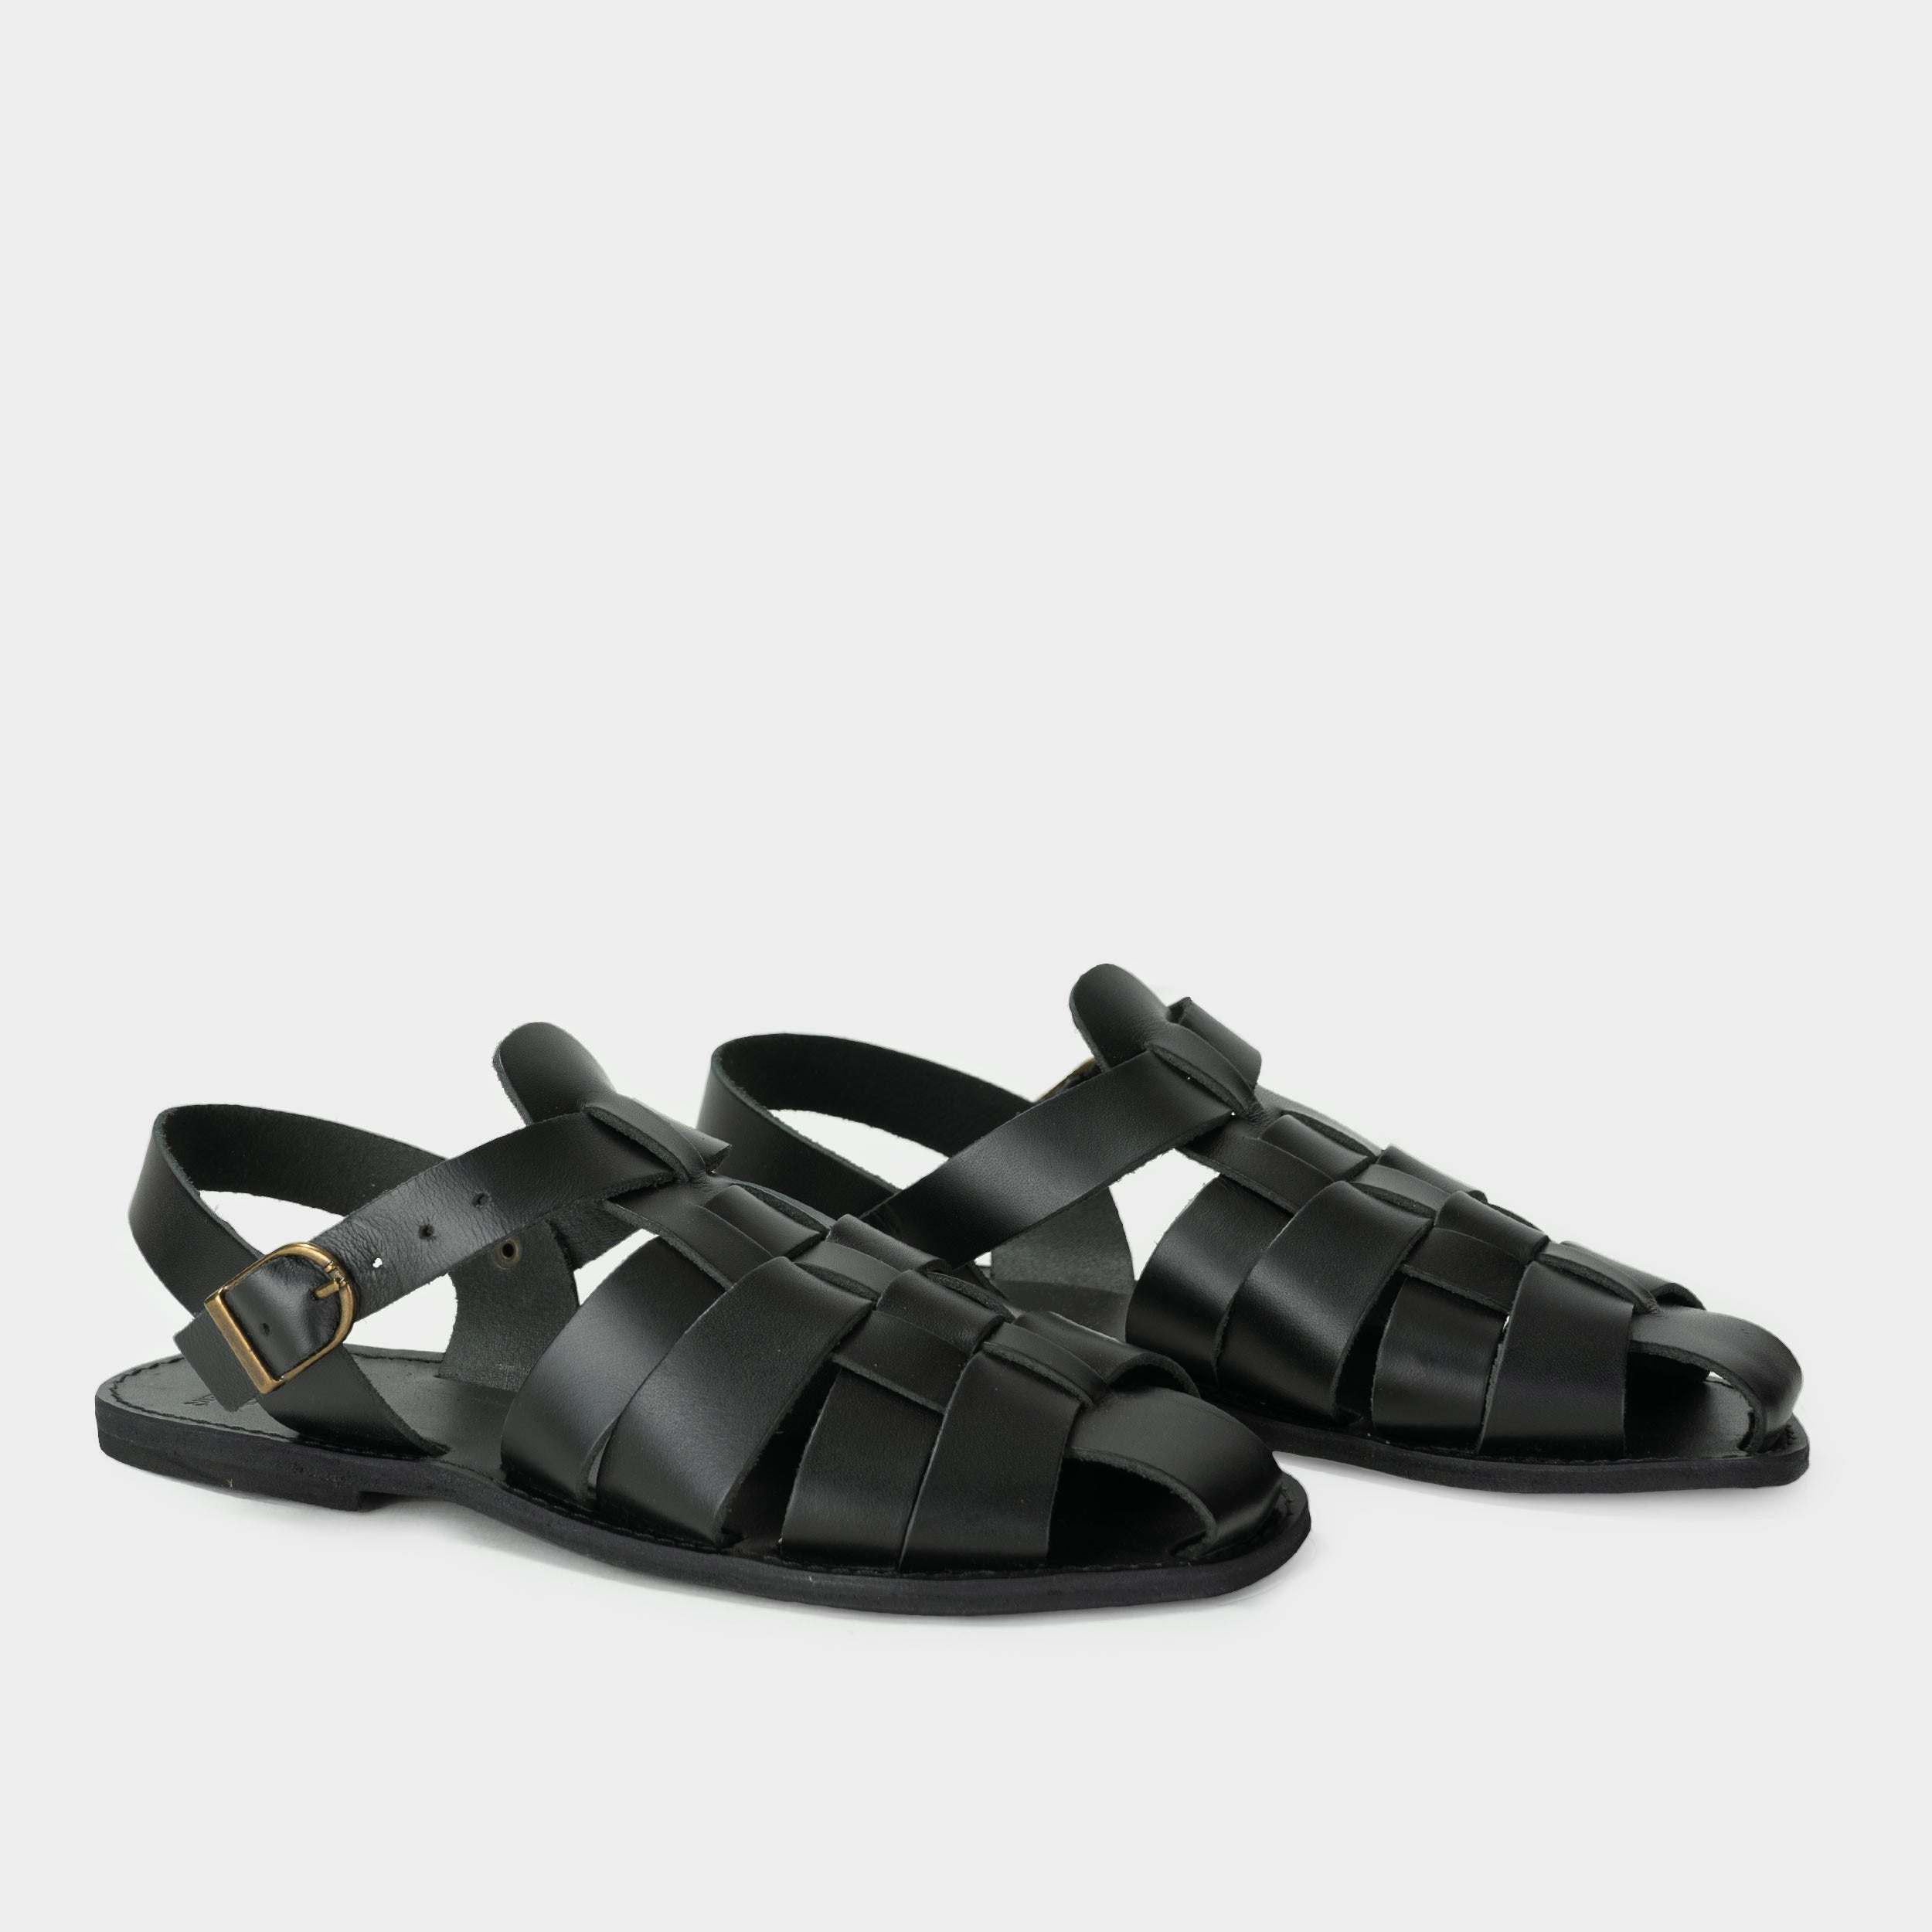 POS Black Synthetic Leather Fisherman Sandals for Men - 06 UK